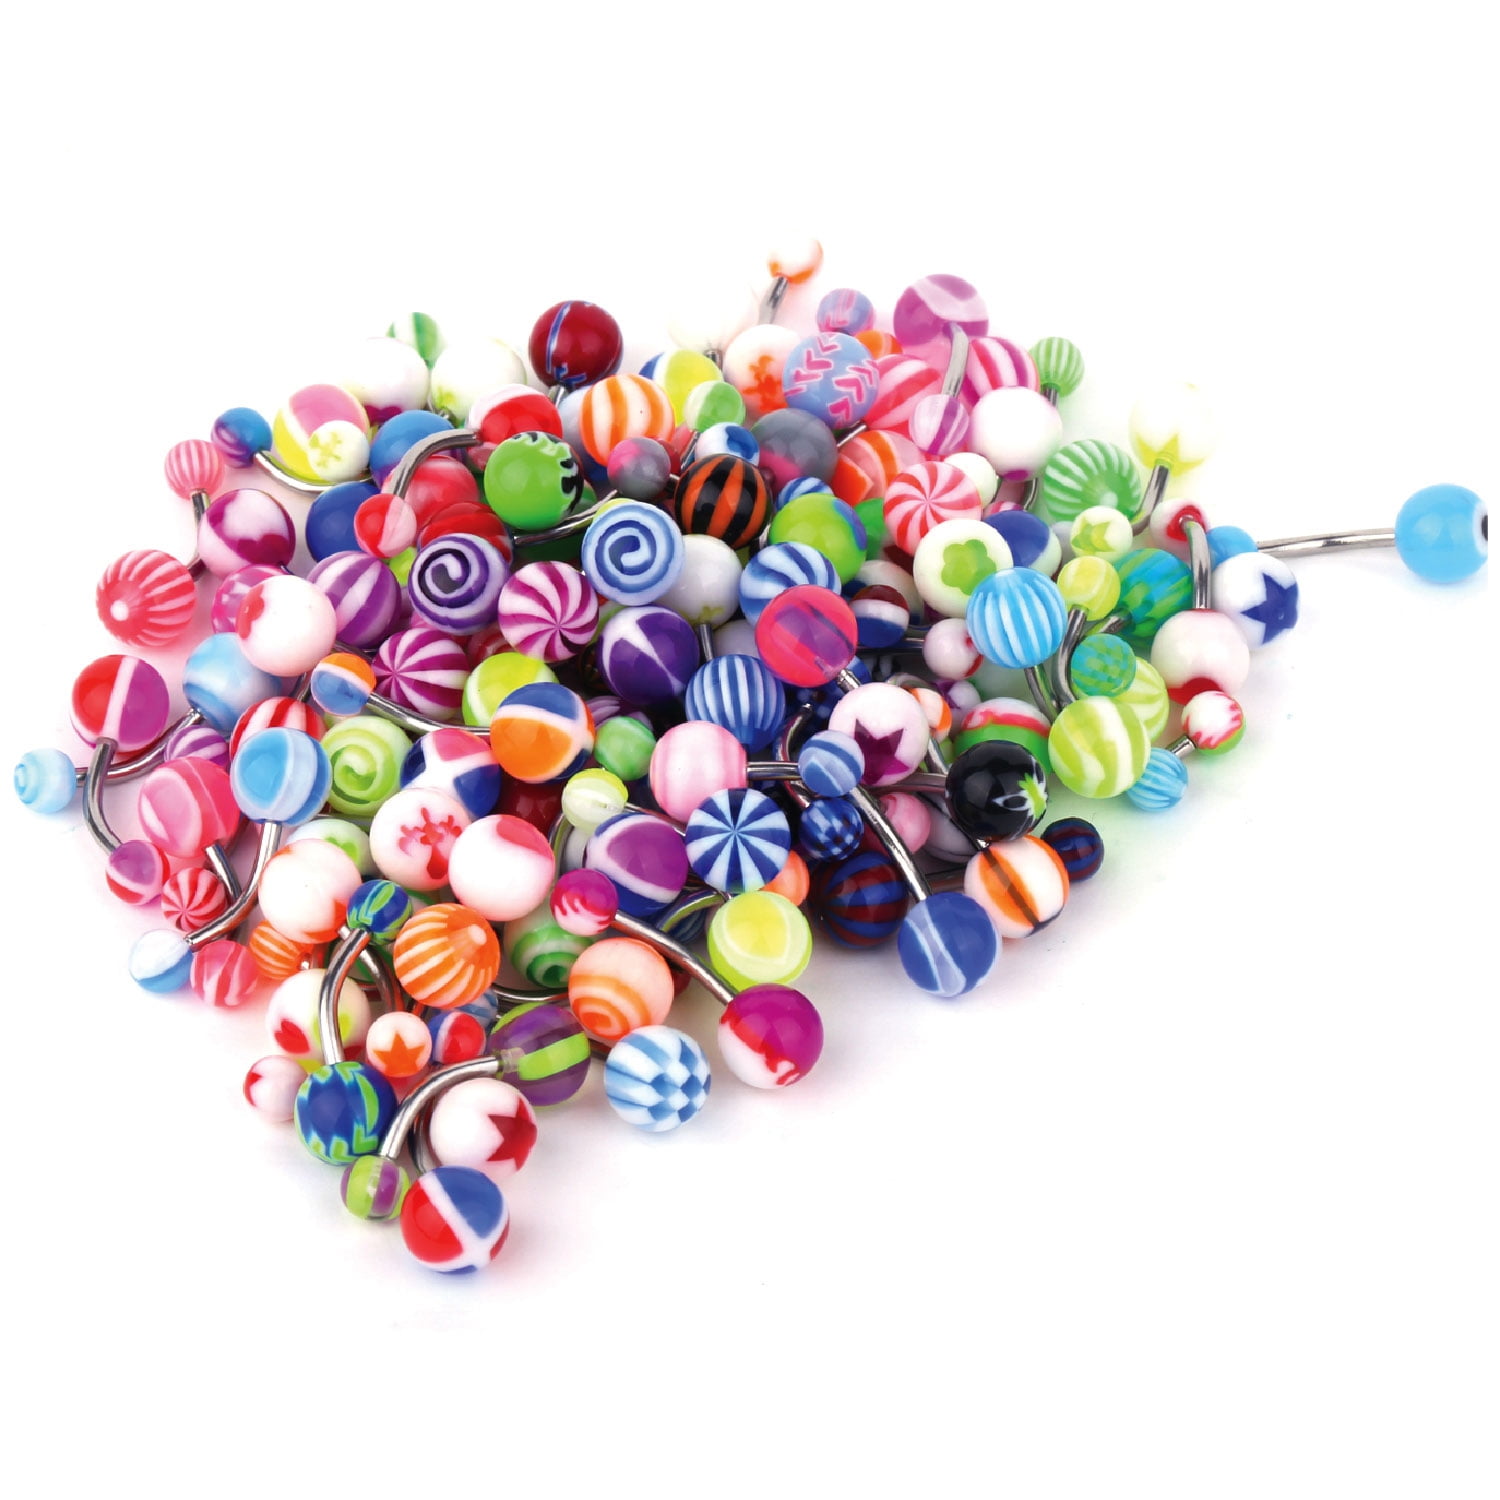 Oasis Plus Wholesale Lot 100pcs 14G Belly Button Rings Navel Barbell Acrylic Balls 316L Surgical Stainless